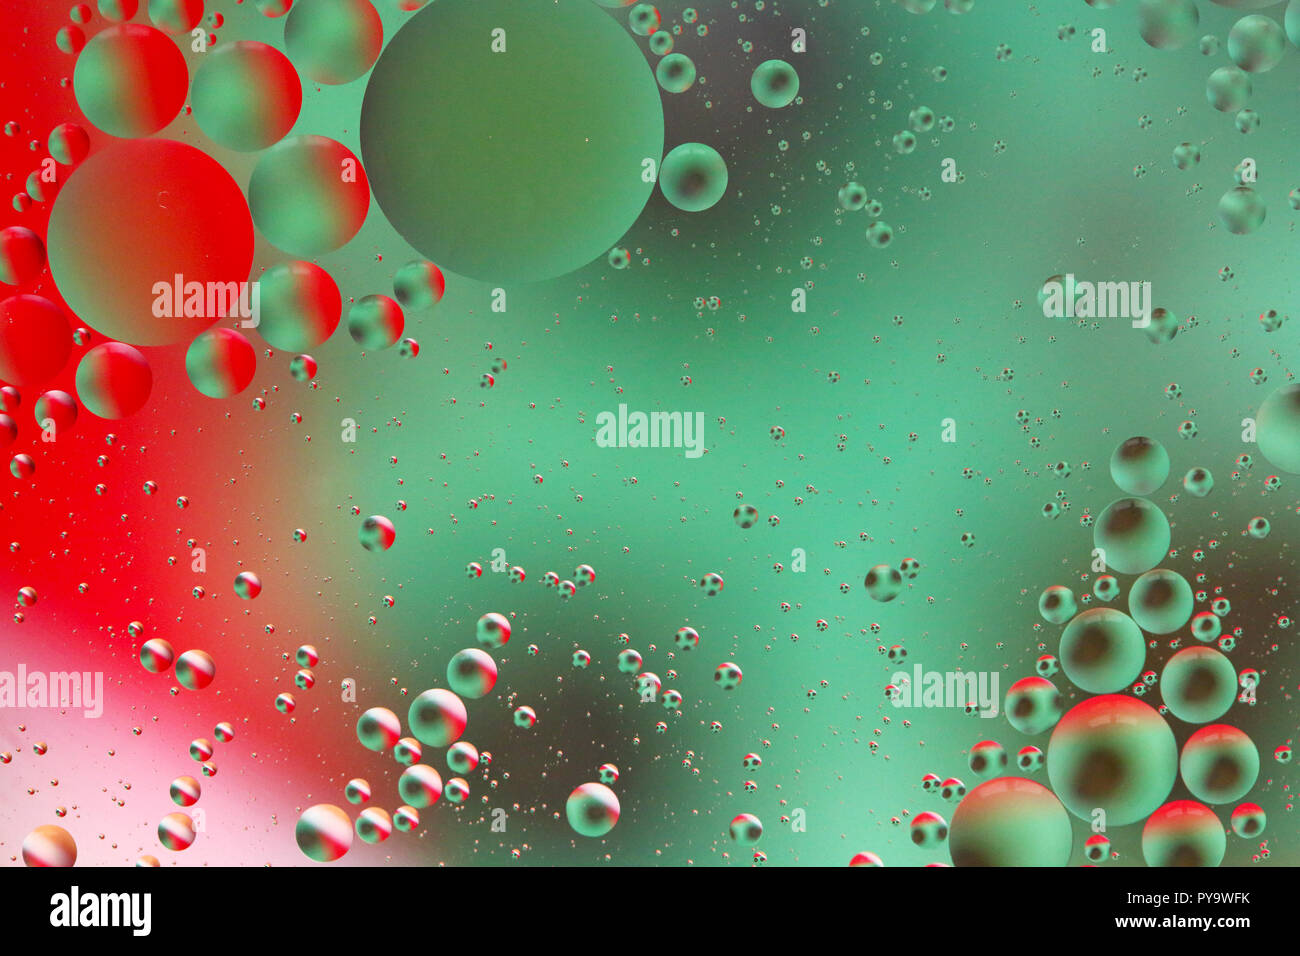 Abstract red and green bubbles - oil on water Stock Photo